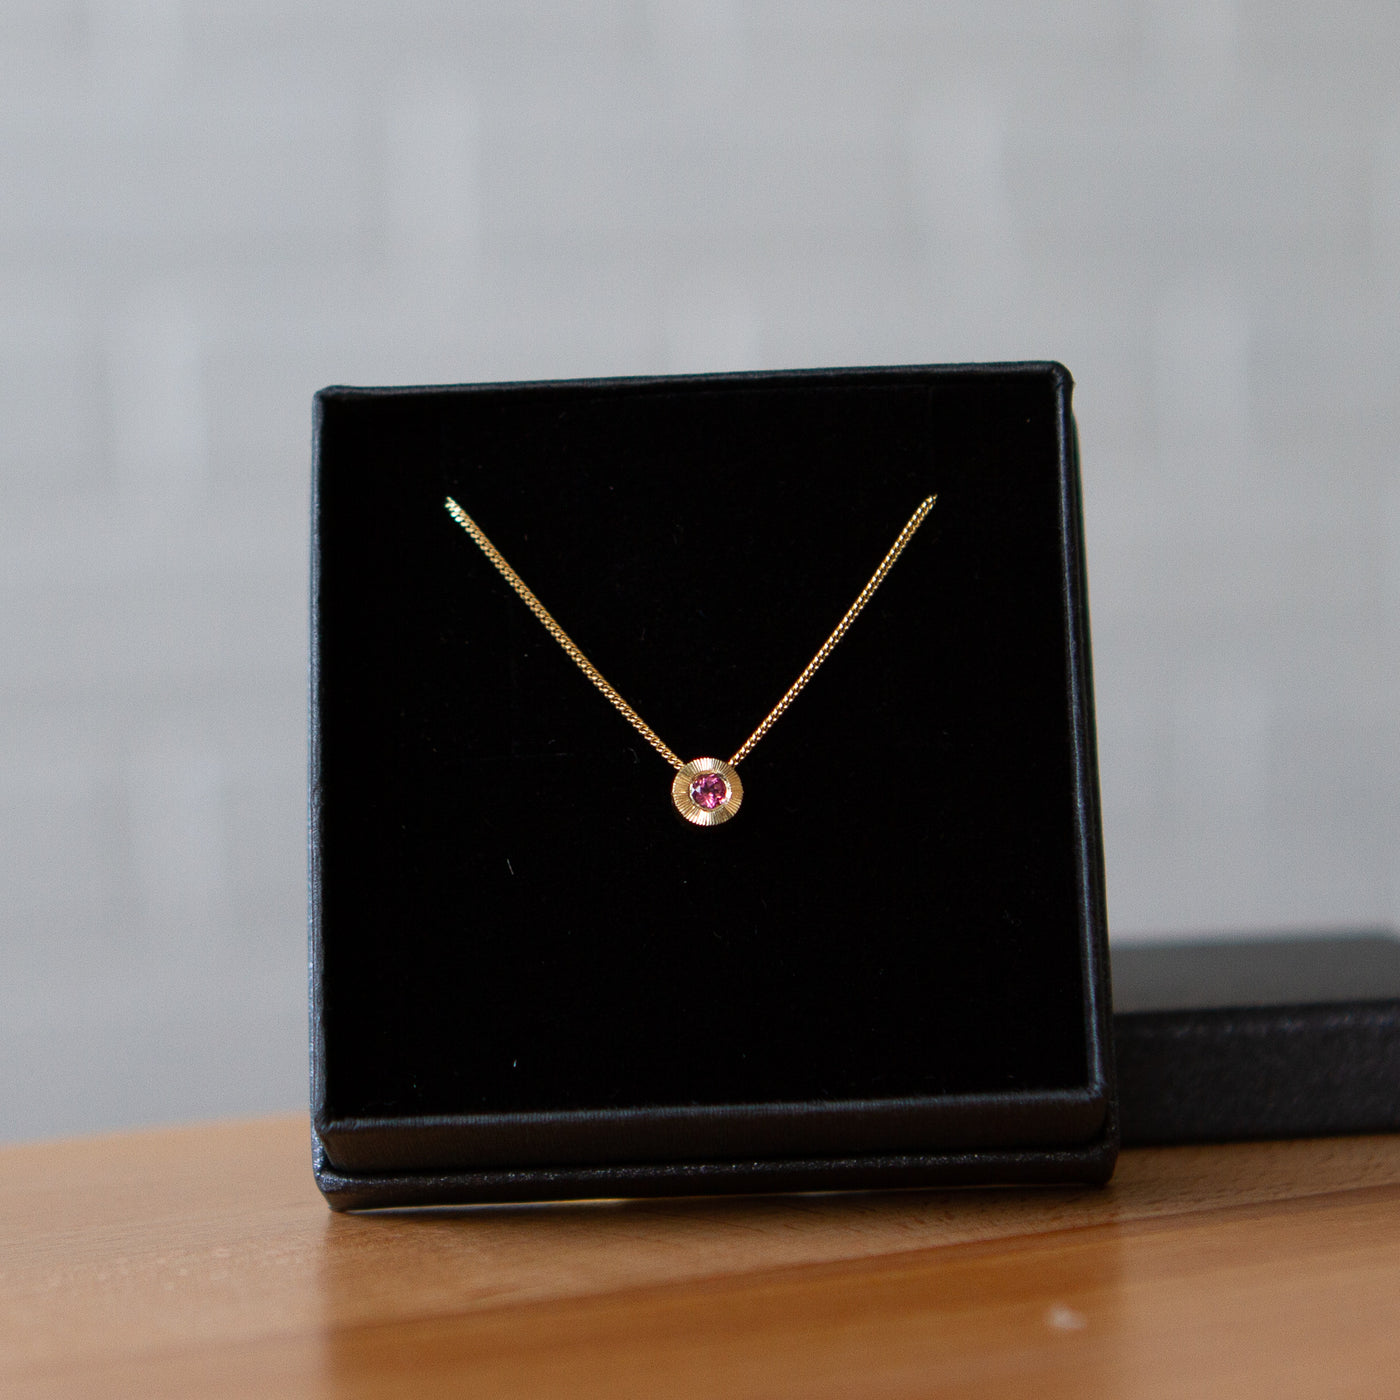 October birthstone Aurora slide necklace with pink tourmaline in yellow gold in a gift box